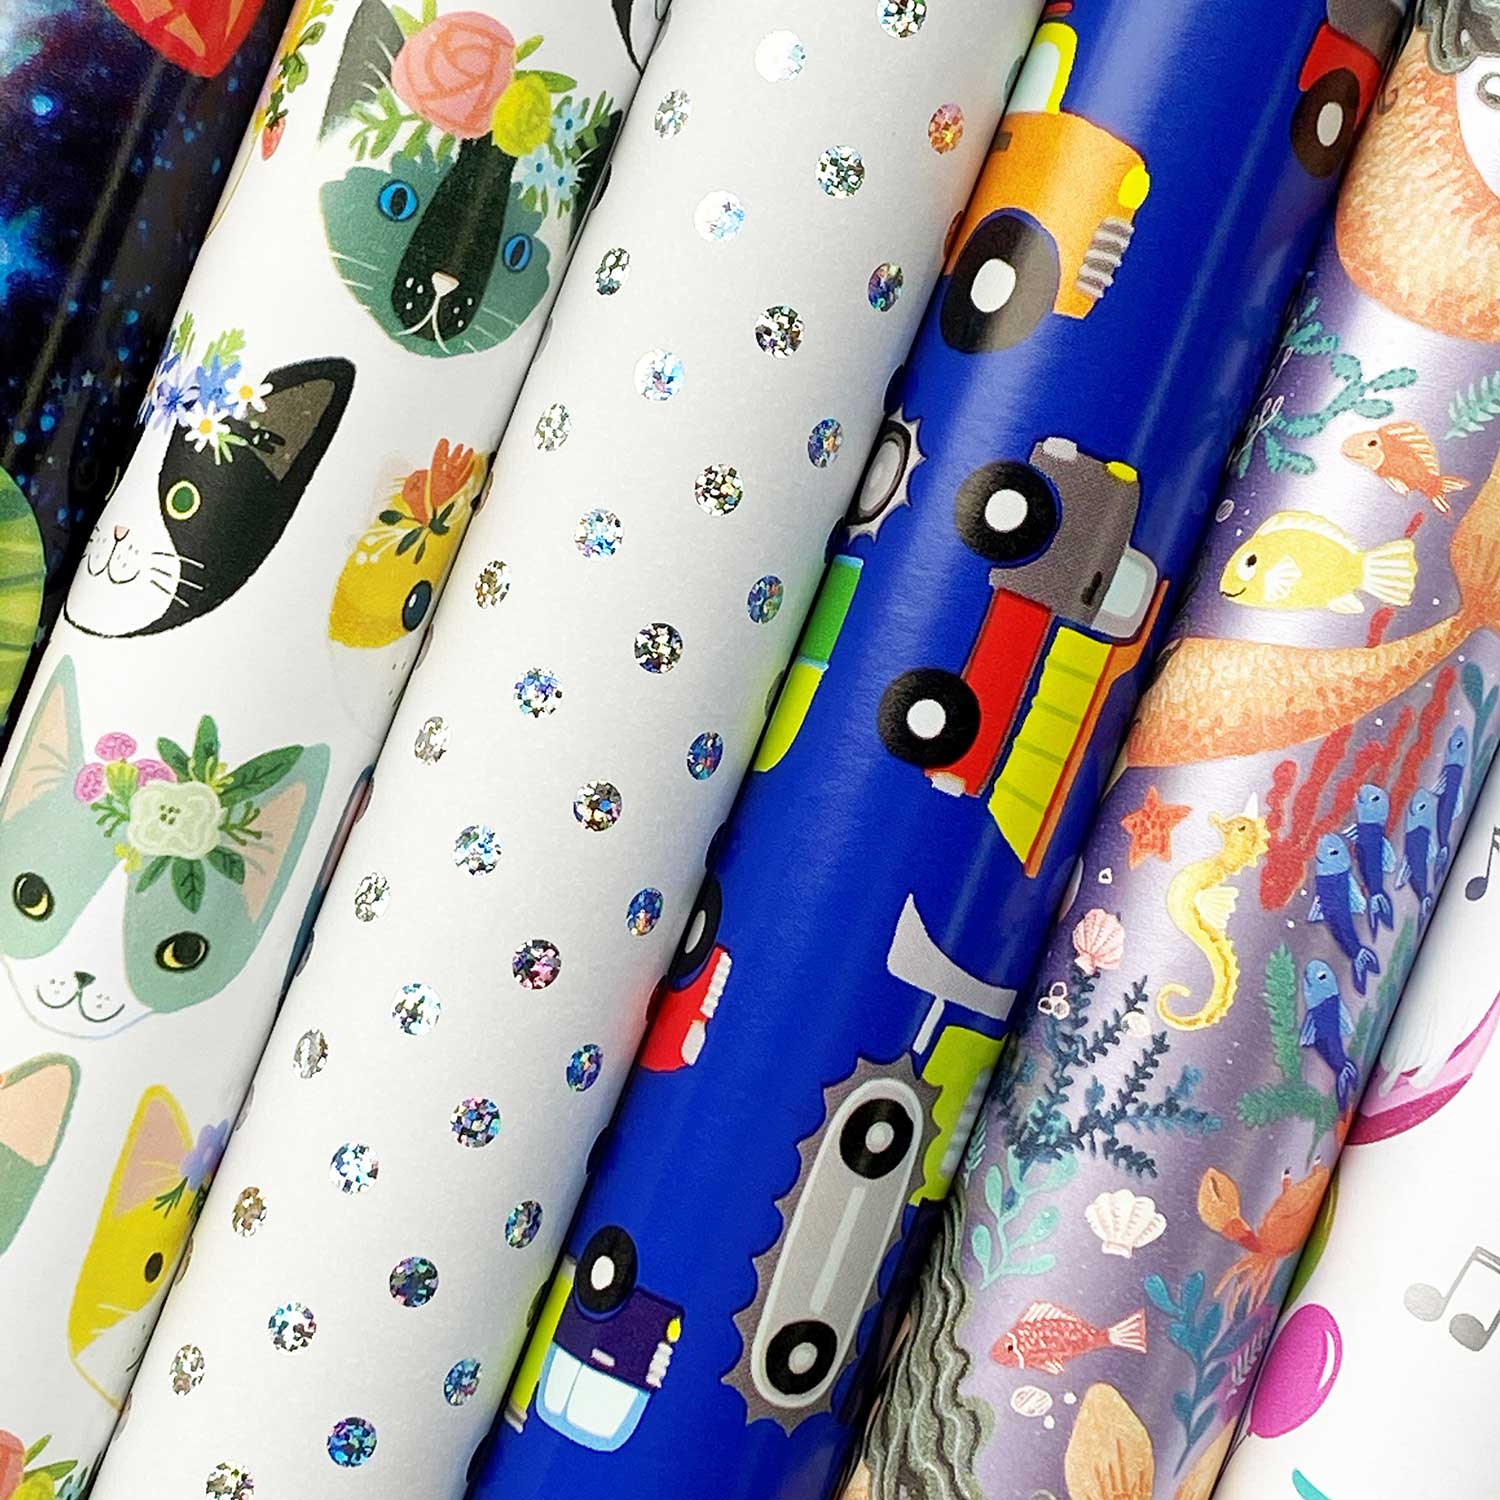 All-Occasion Wrapping Paper Variety 6-Pack